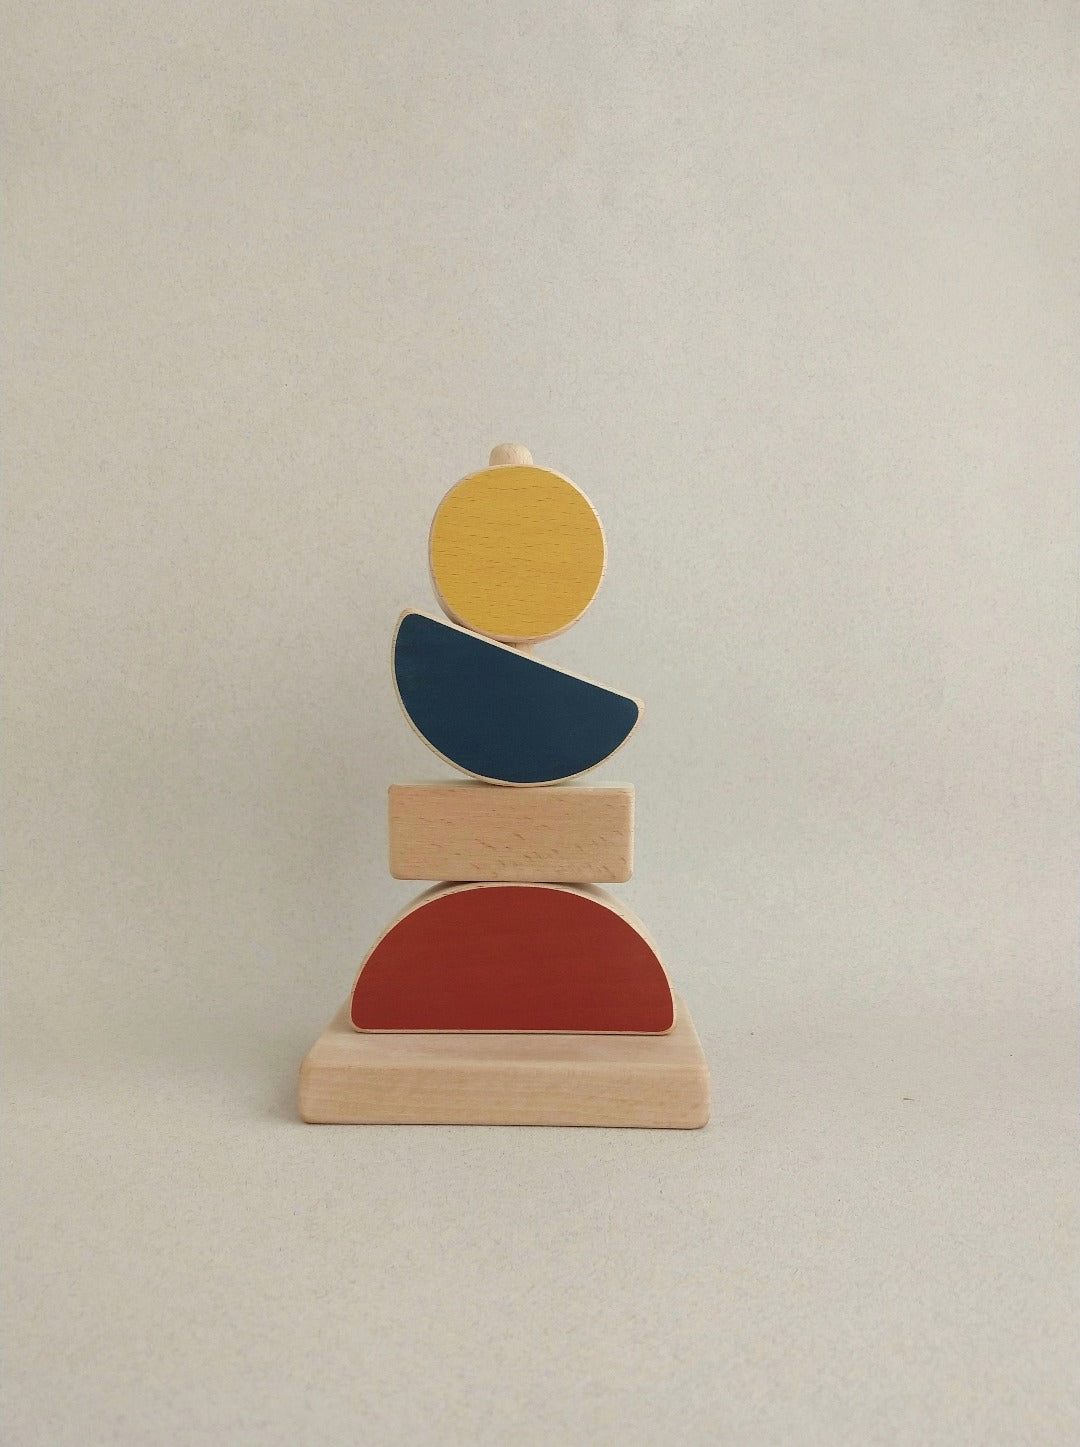 A high-quality & eco-friendly wooden toy with abstract forms (mountain, horizon, moon and sun)and earthy tones.